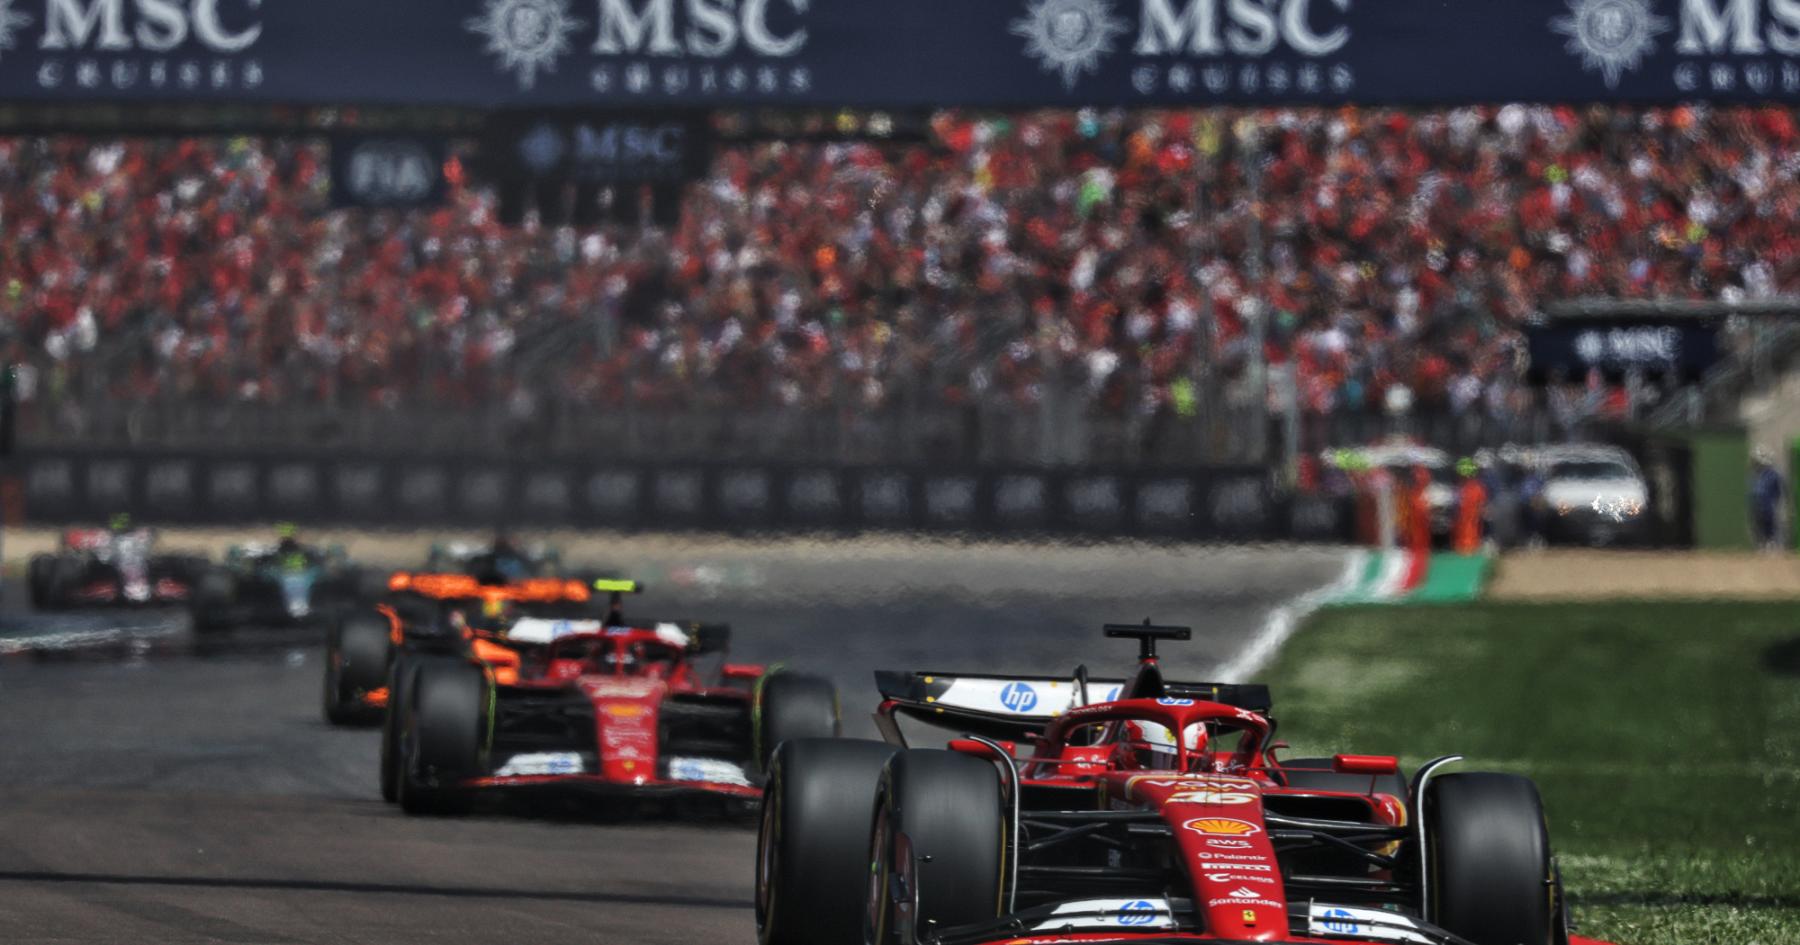 Revved Up Drama: Leclerc Points Fingers as Verstappen Grapples with Adversity - A RacingNews365 Exclusive